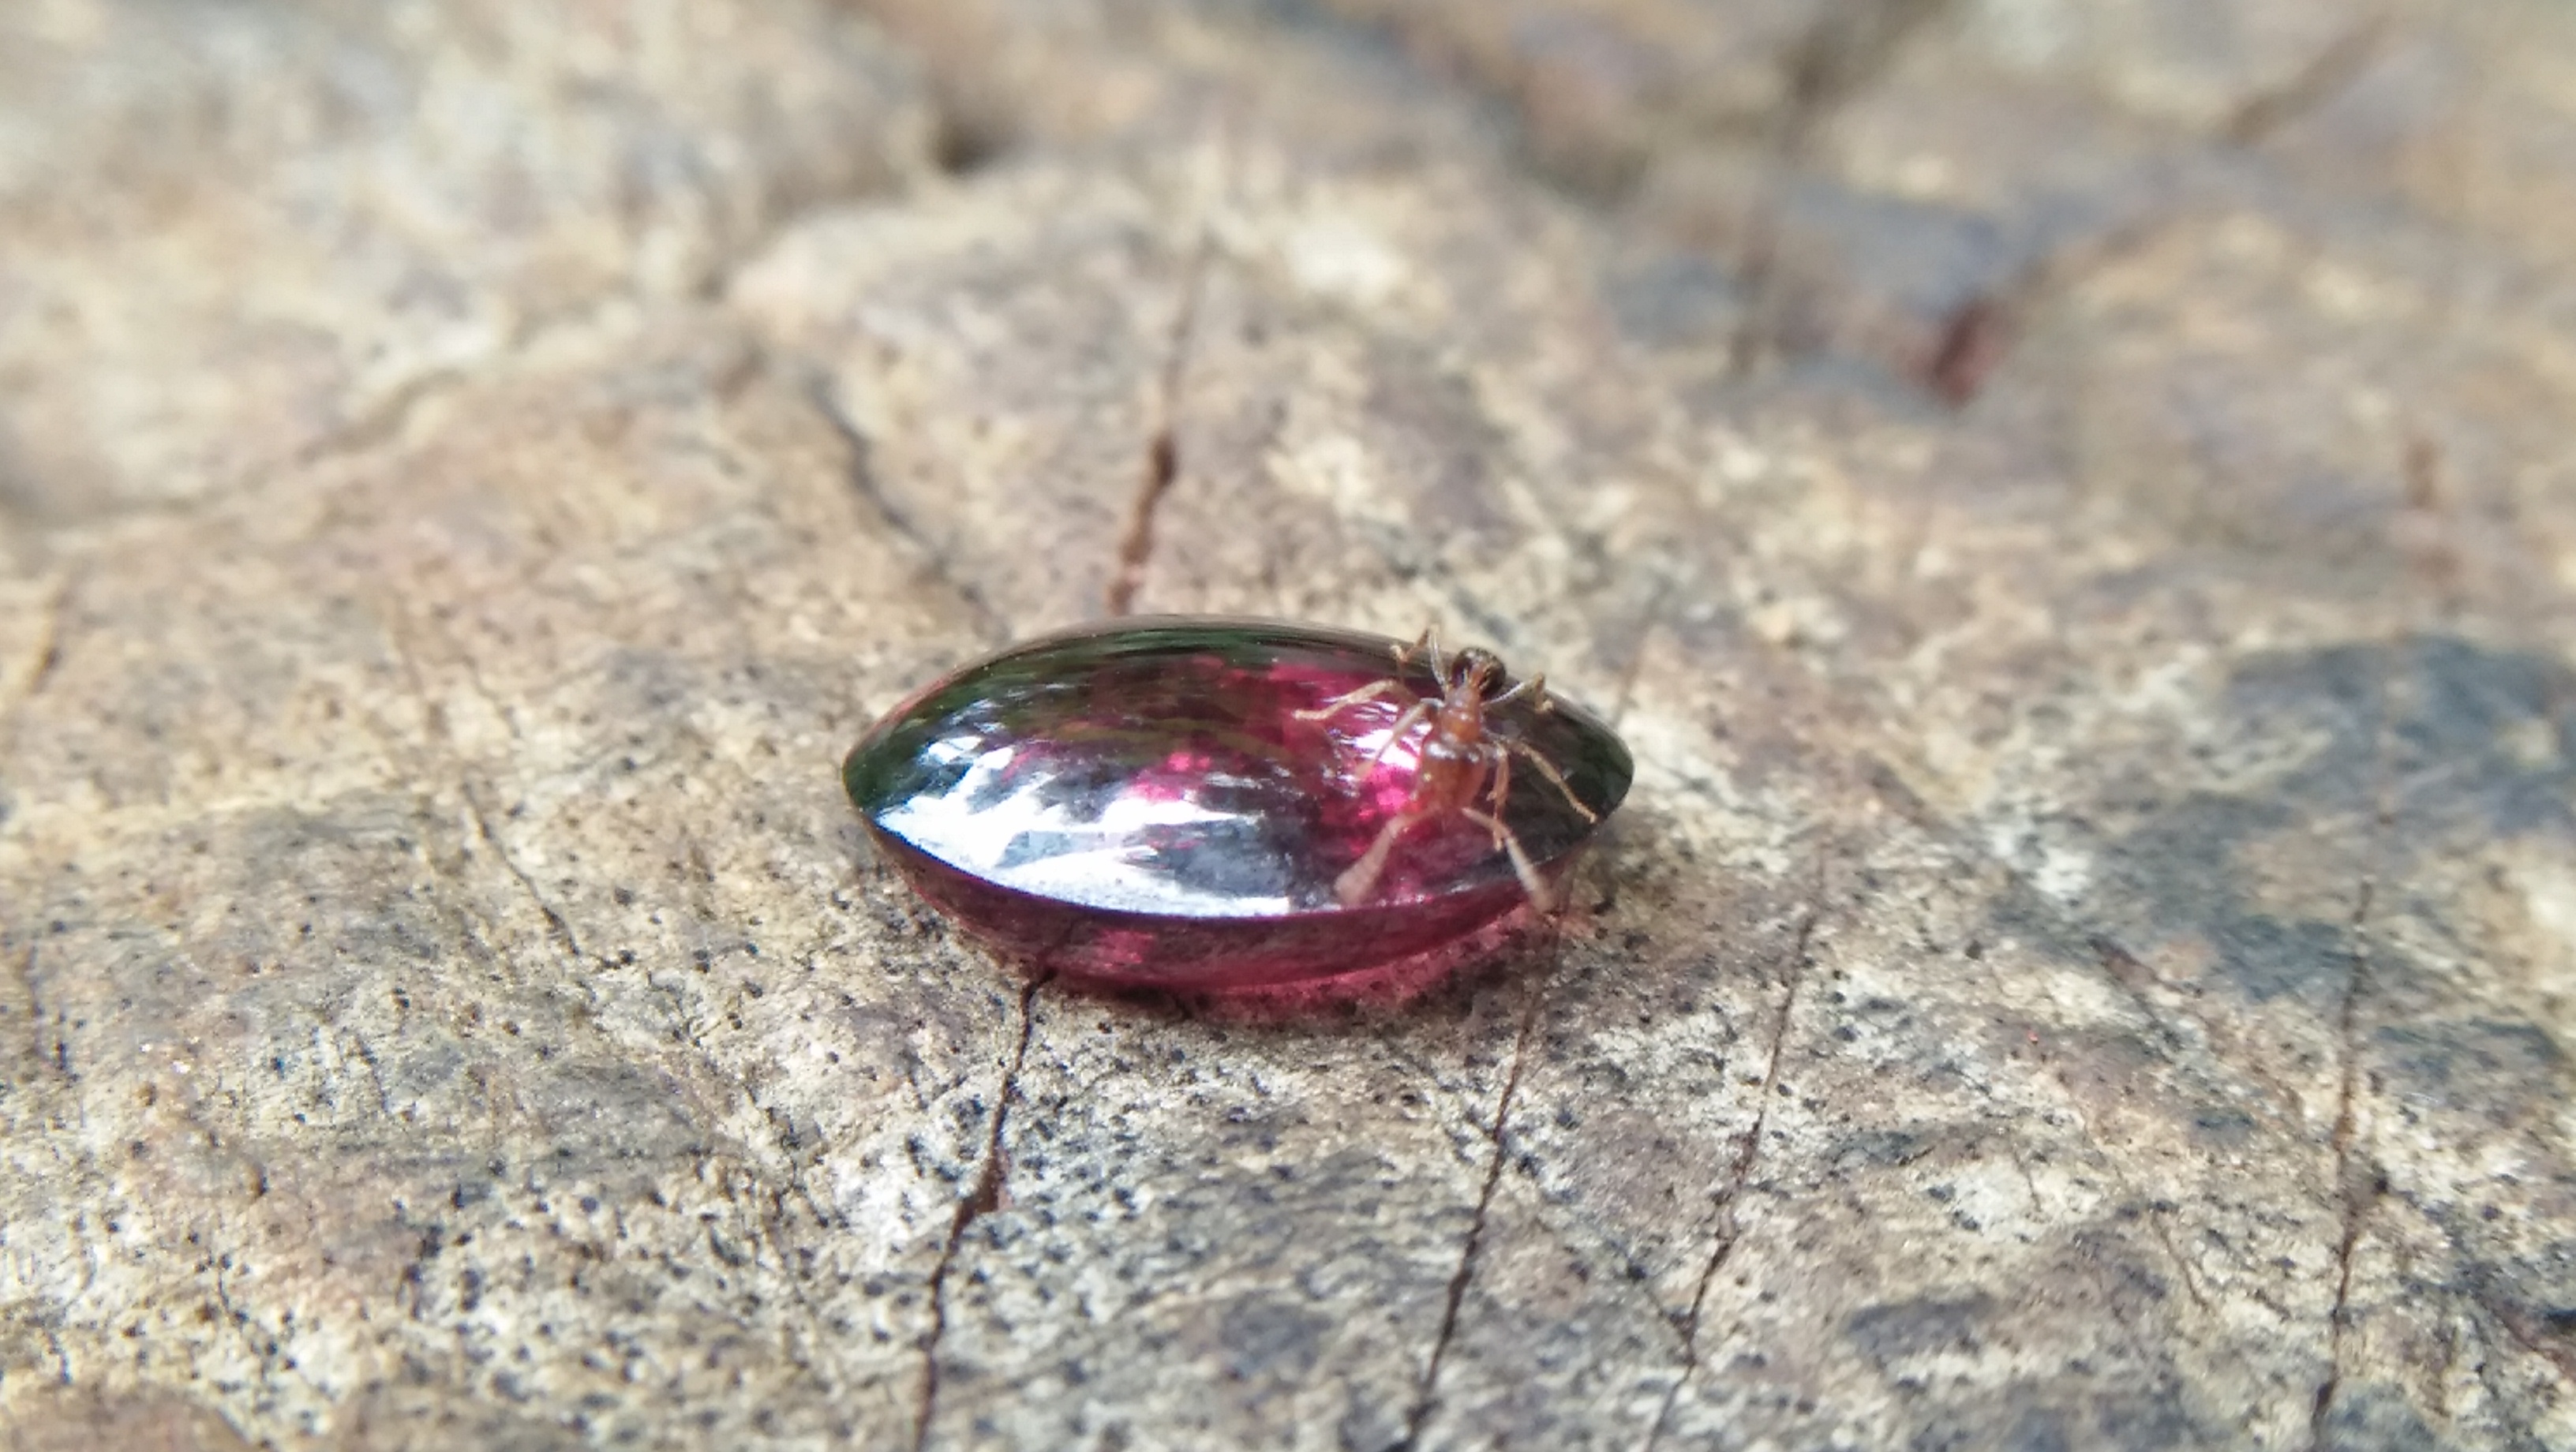 Ceylon Natural Rhodolite Garnet Cabochon Eye 👀 Weight: 2.05Cts Dimension: 9.1mm x 6.9mm x 3.5mm Mineral: Ratapura, Sri Lanka Clarity: Very Clean Colour: Pinkish Red Birthstone: June birthstone Rhodolite is a varietal name for rose-pink to red mineral pyrope, a species in the garnet group Mohs scale hardness: 7–7.5 Refractive index: 1.760